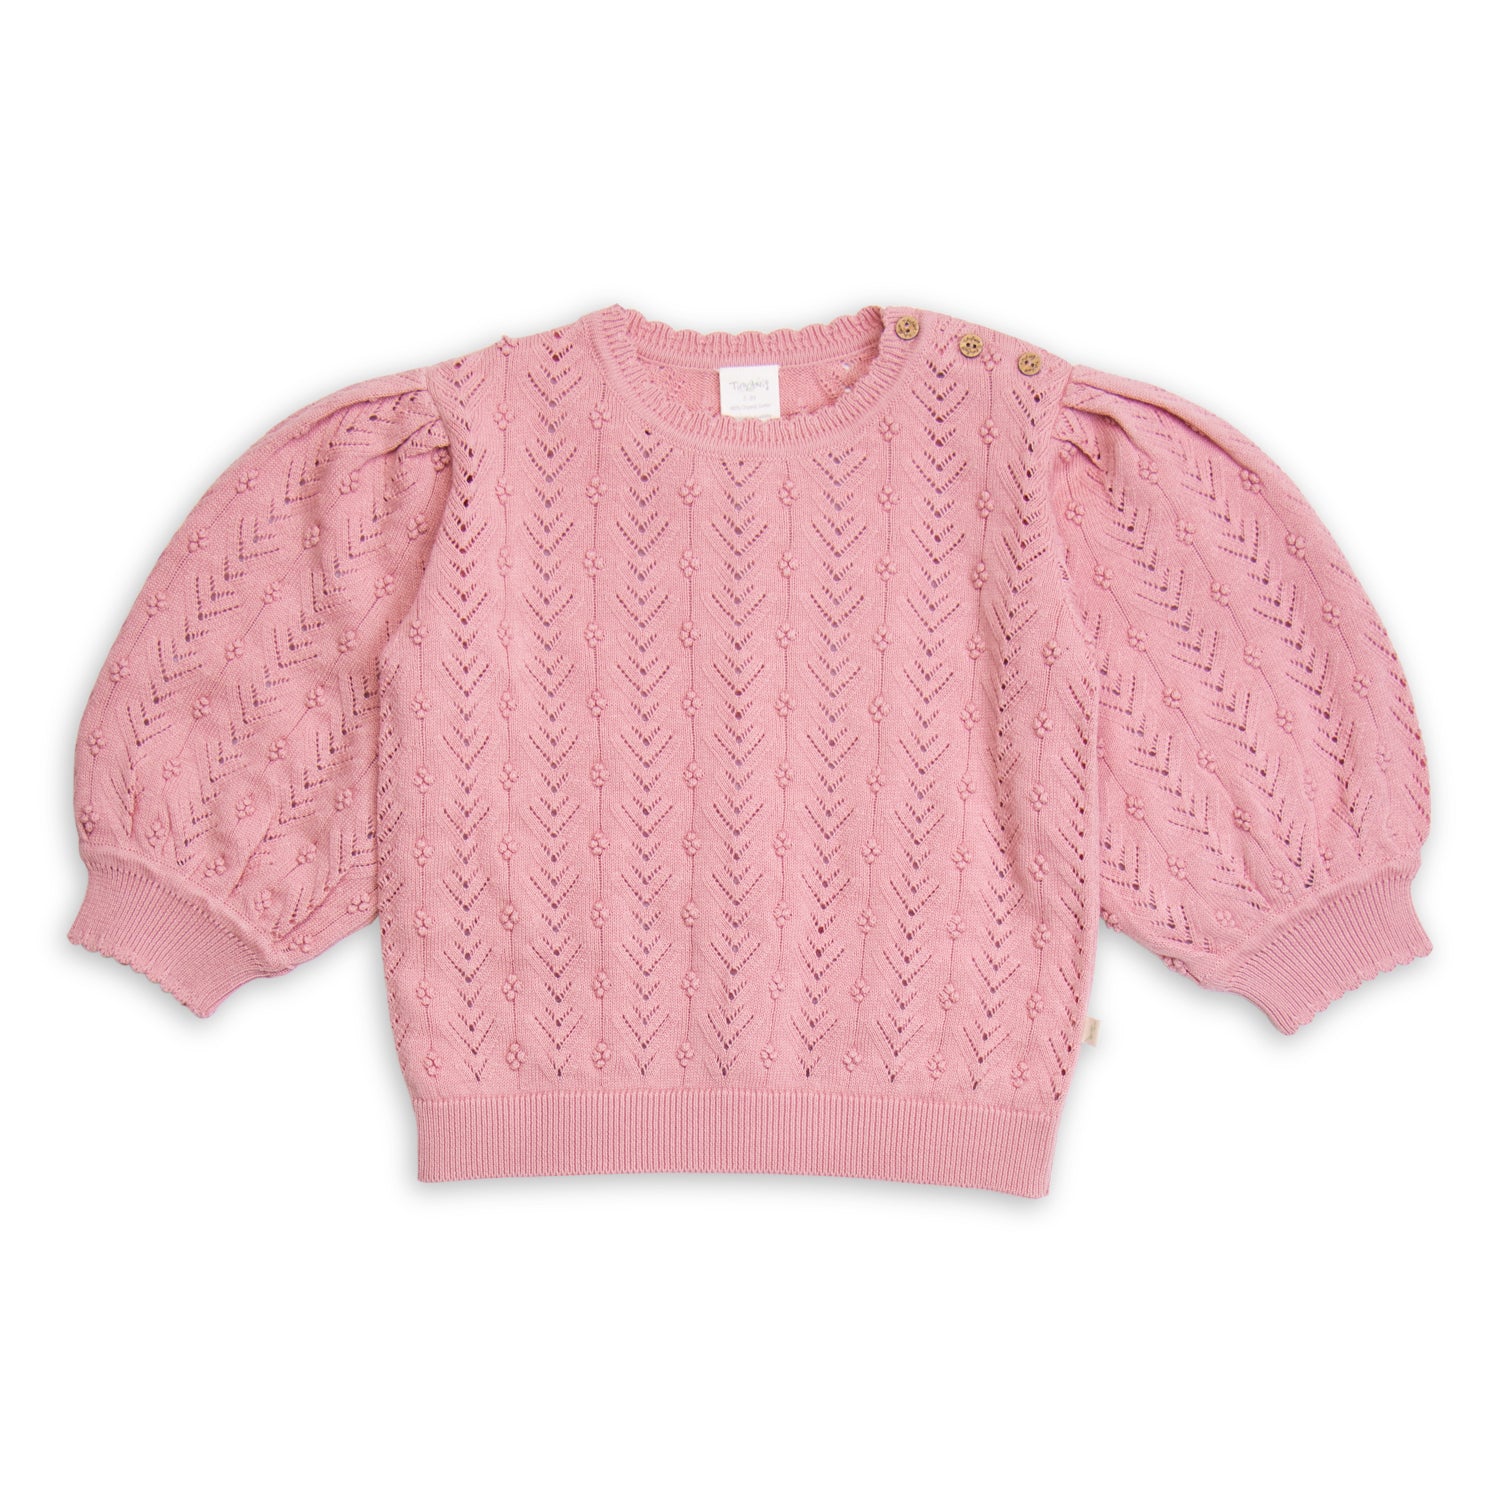 Rose Berry Knit Sweater